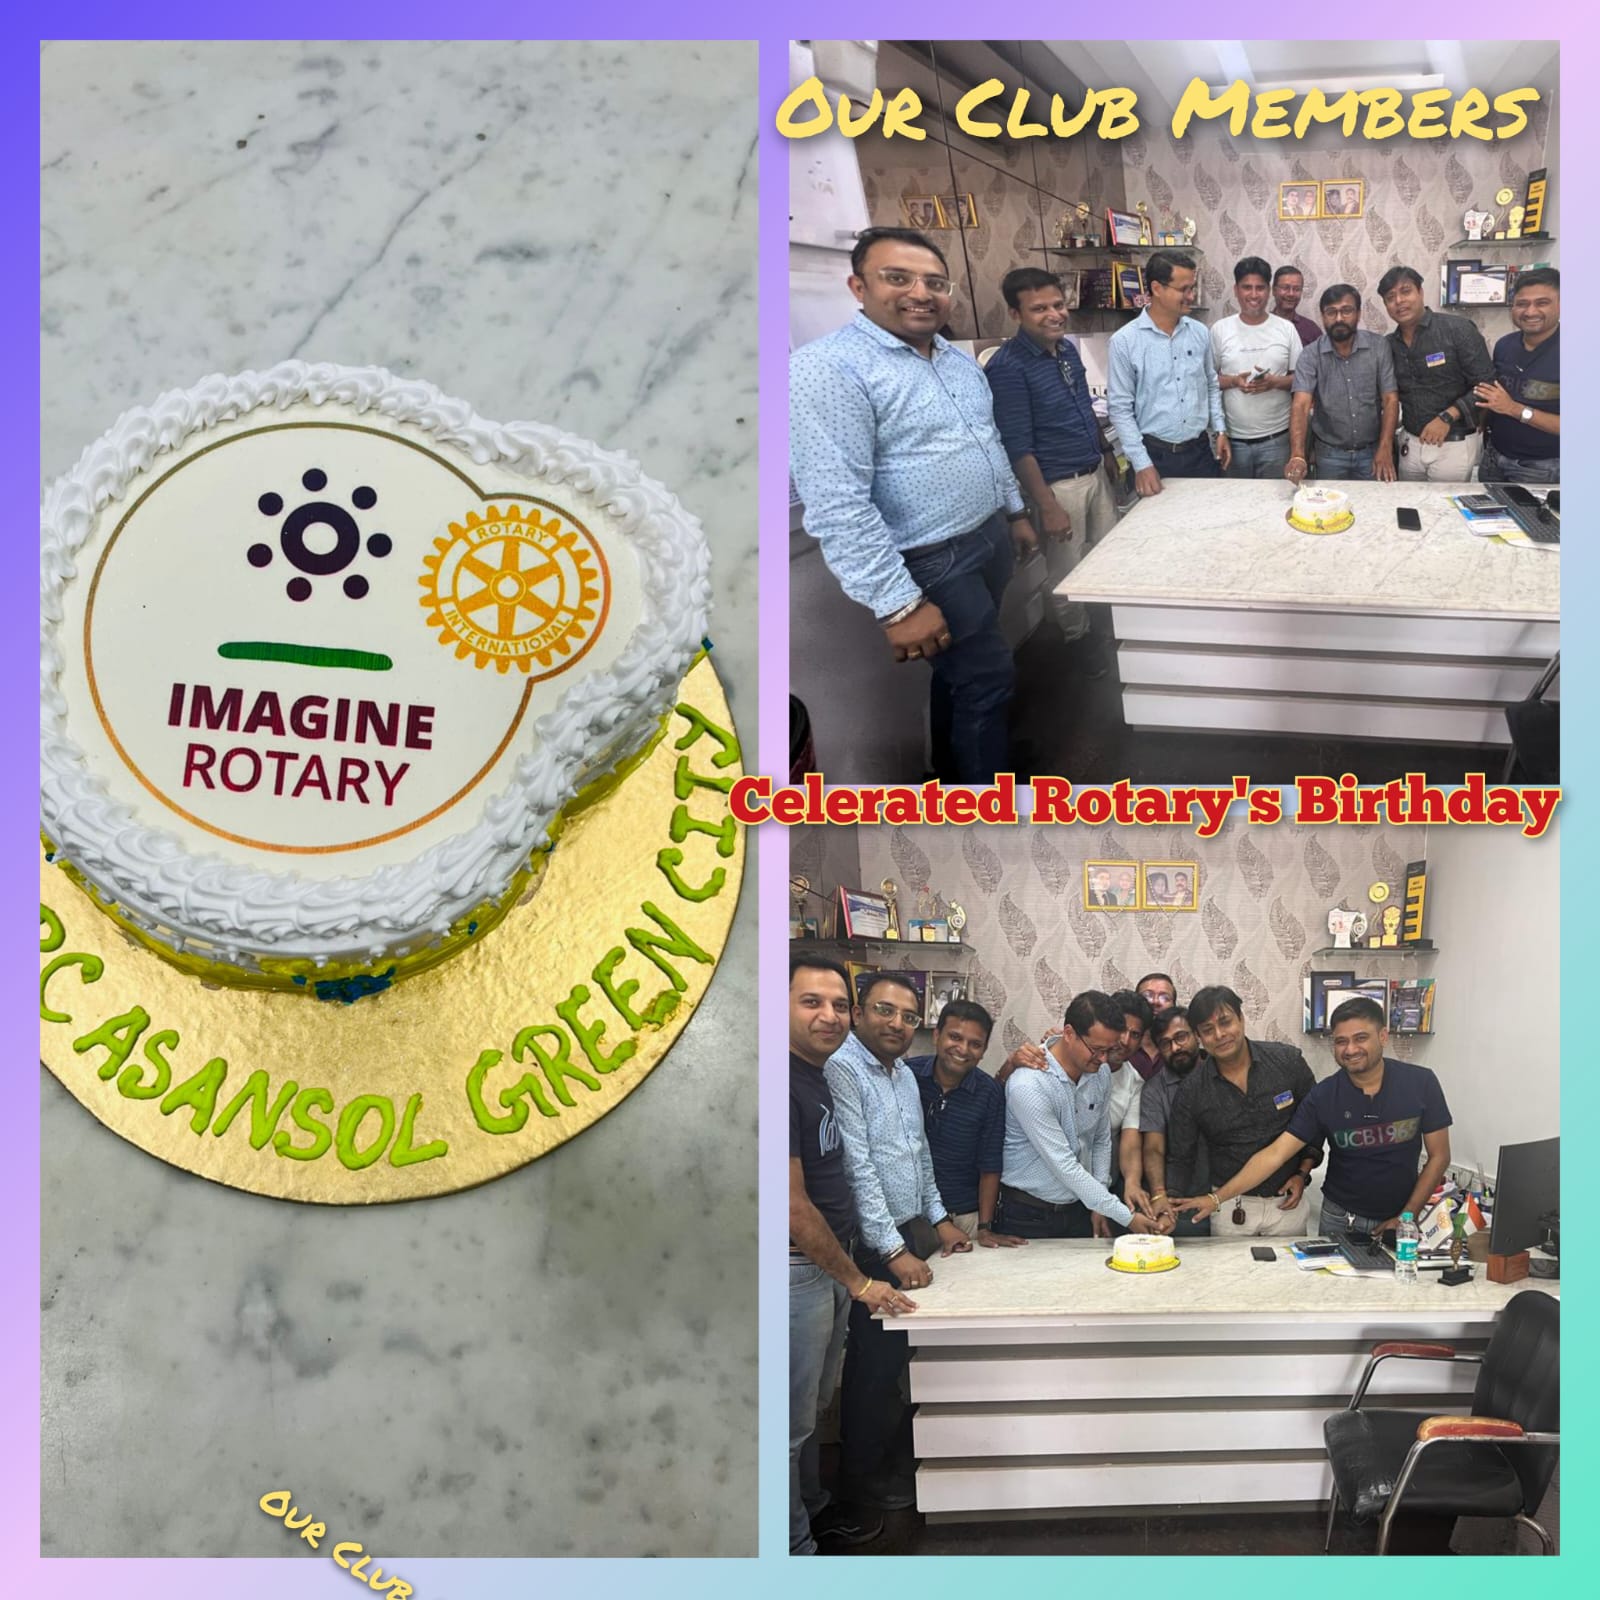 Celebration of Rotary’s 118th Birth Anniversary in our club meeting